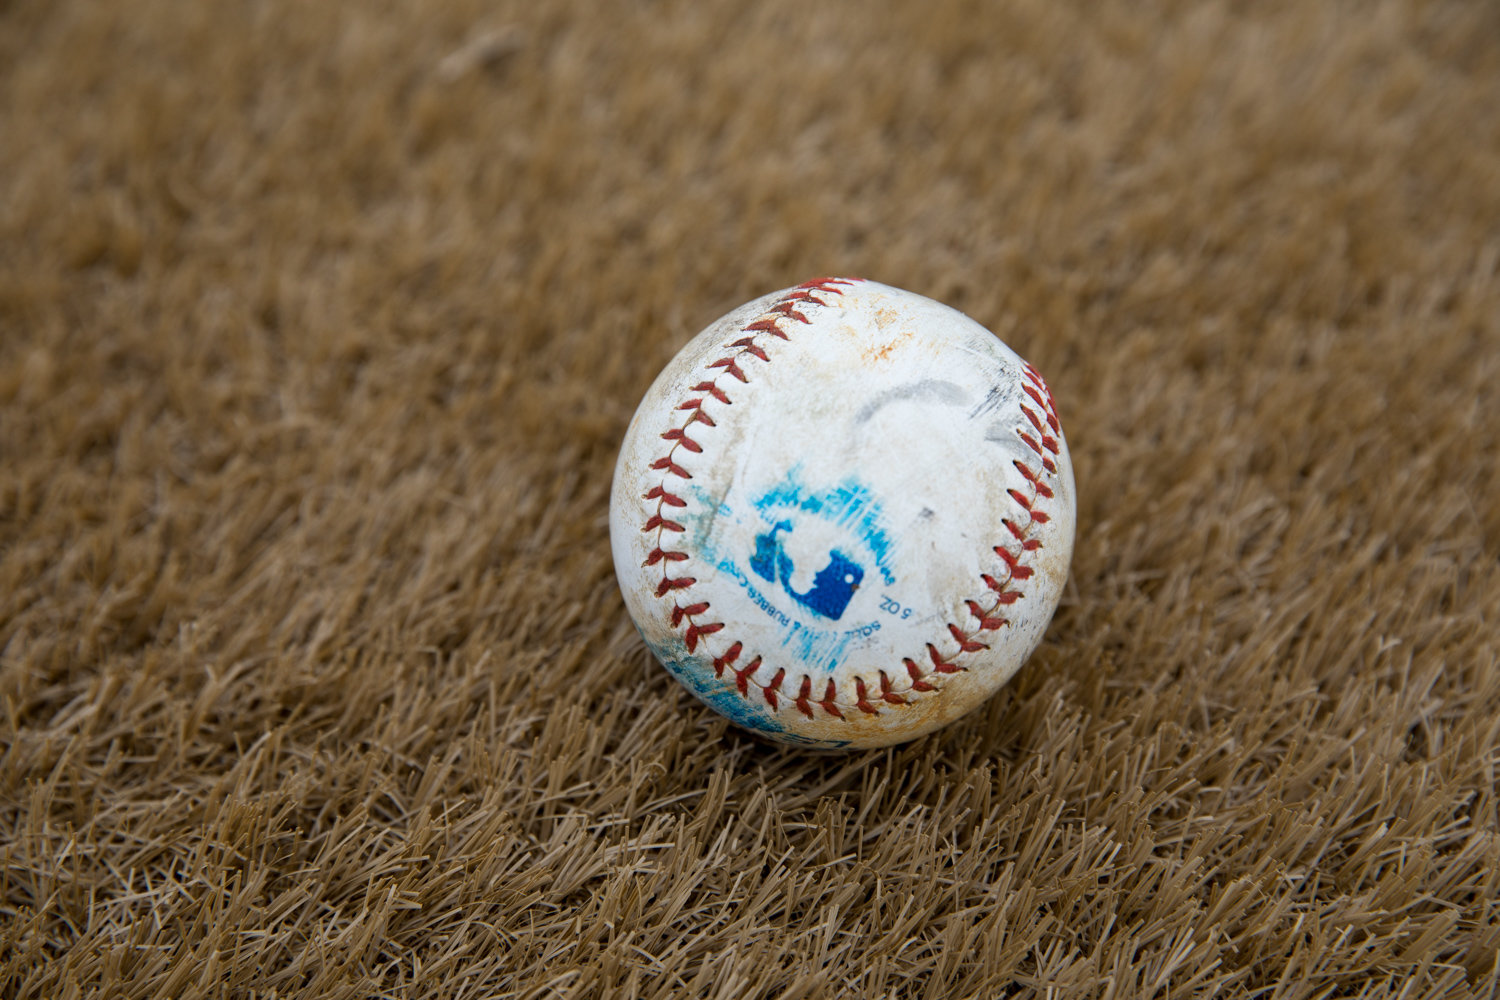 A baseball rests on the artificial turf of one of the newly renovated ballfields at Seton Park. The last of the construction fencing was removed from the park Jan. 30, marking the end of the renovation work that began last year.